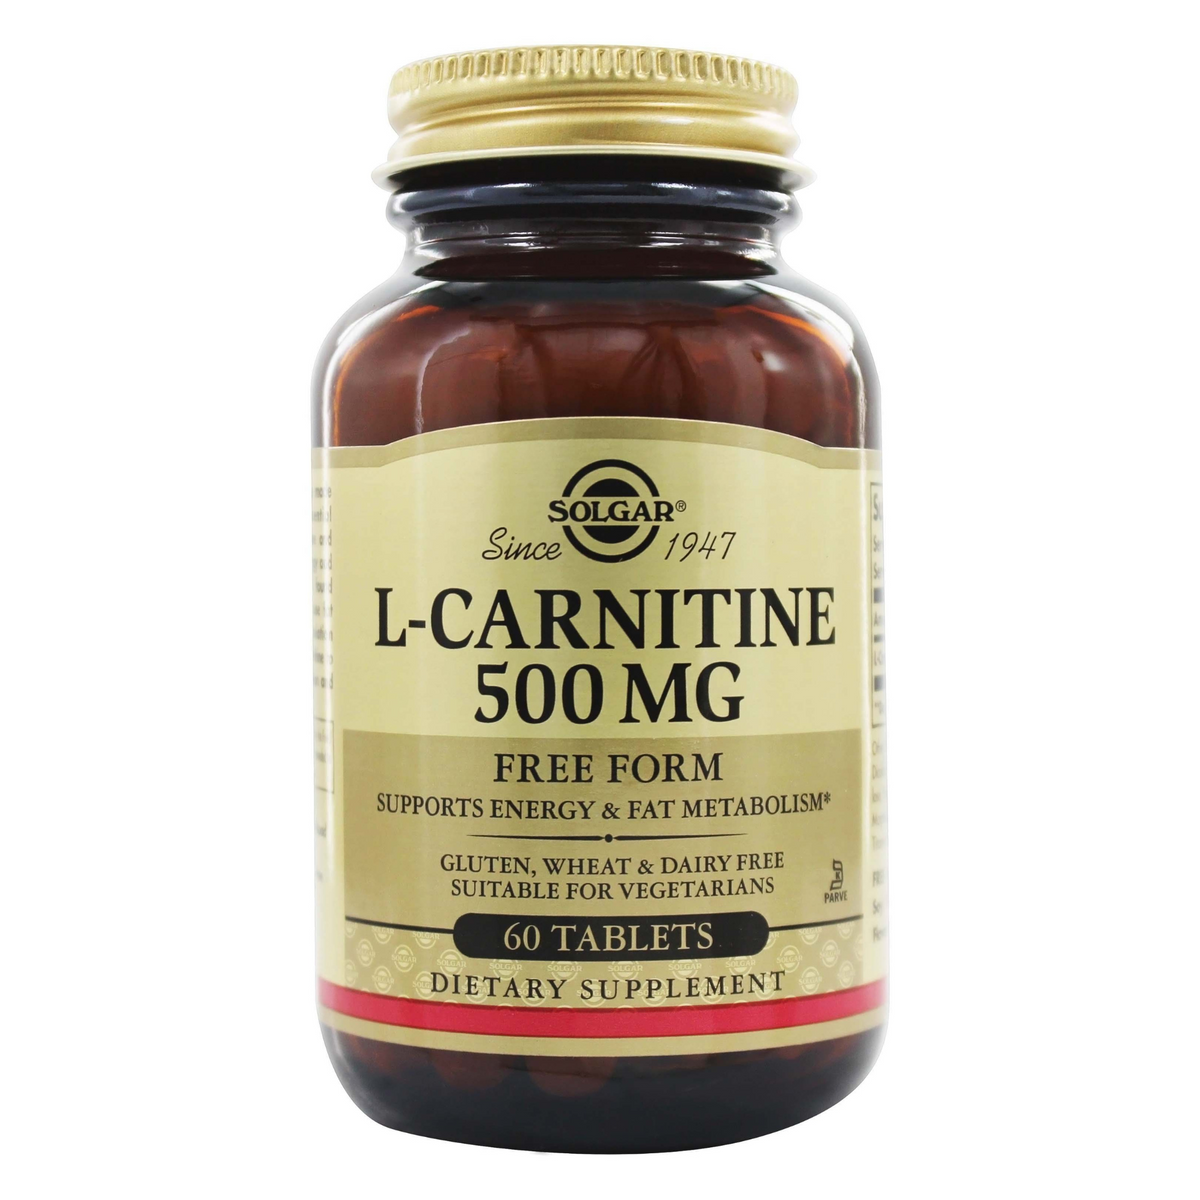 Primary image of L-Carnitine